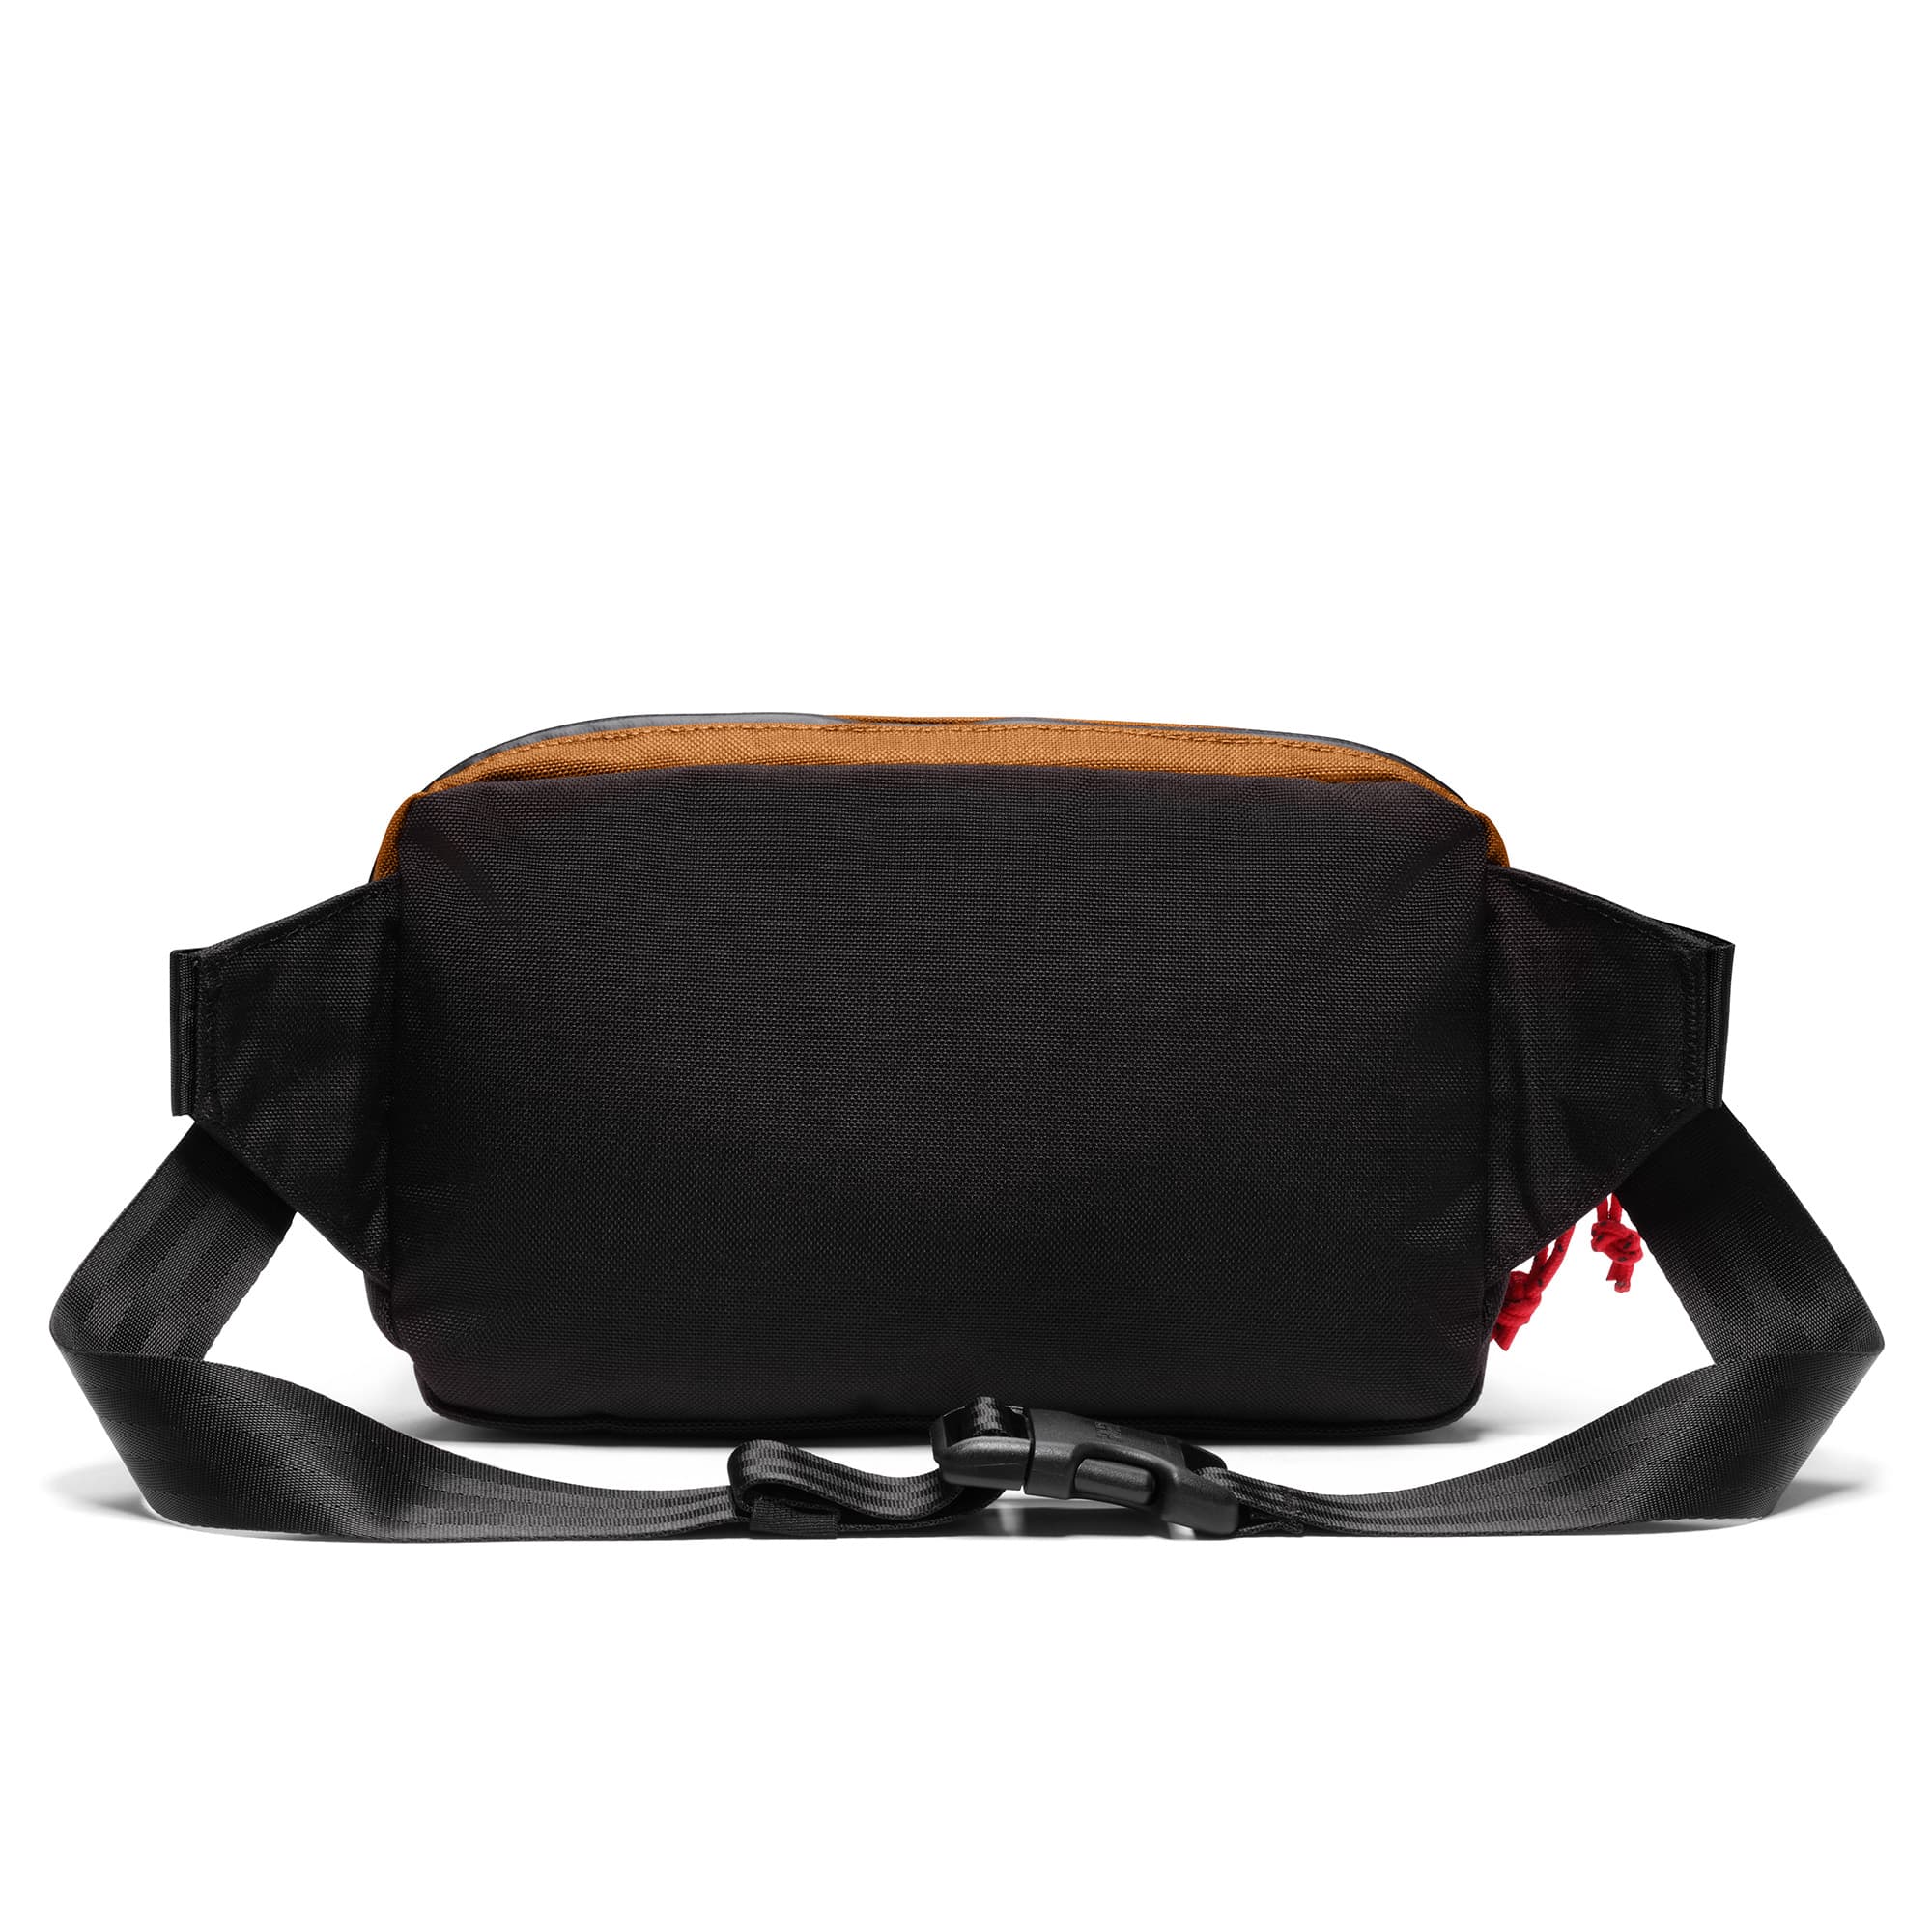 Ziptop Waistpack sling in amber strap view #color_amber tritone